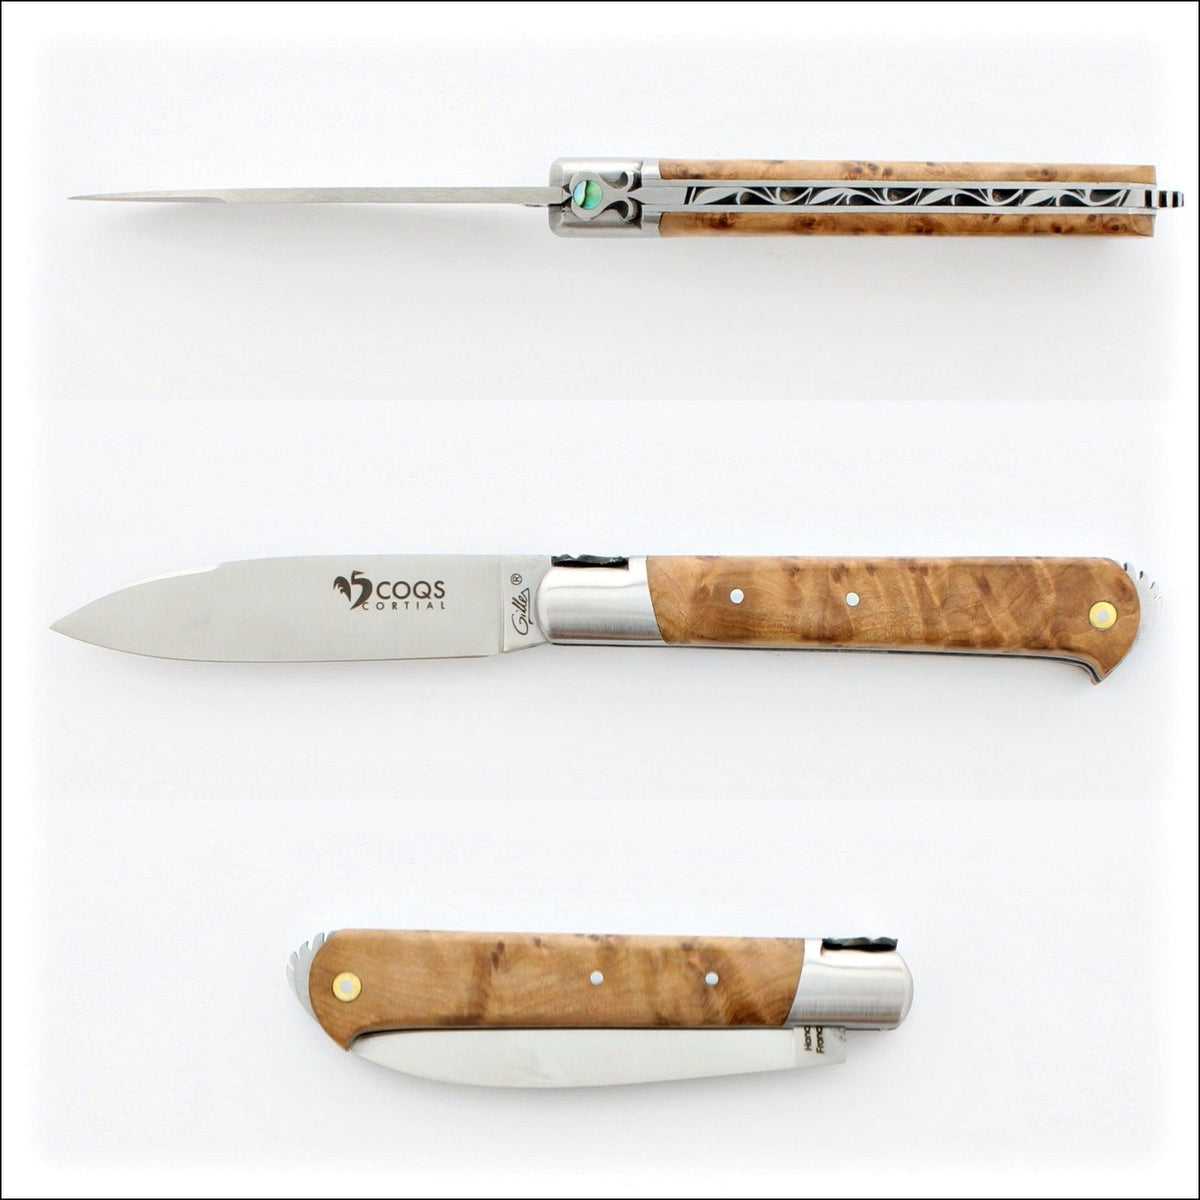 5 Coqs Pocket Knife - Thuya &amp; Mother of Pearl Inlay